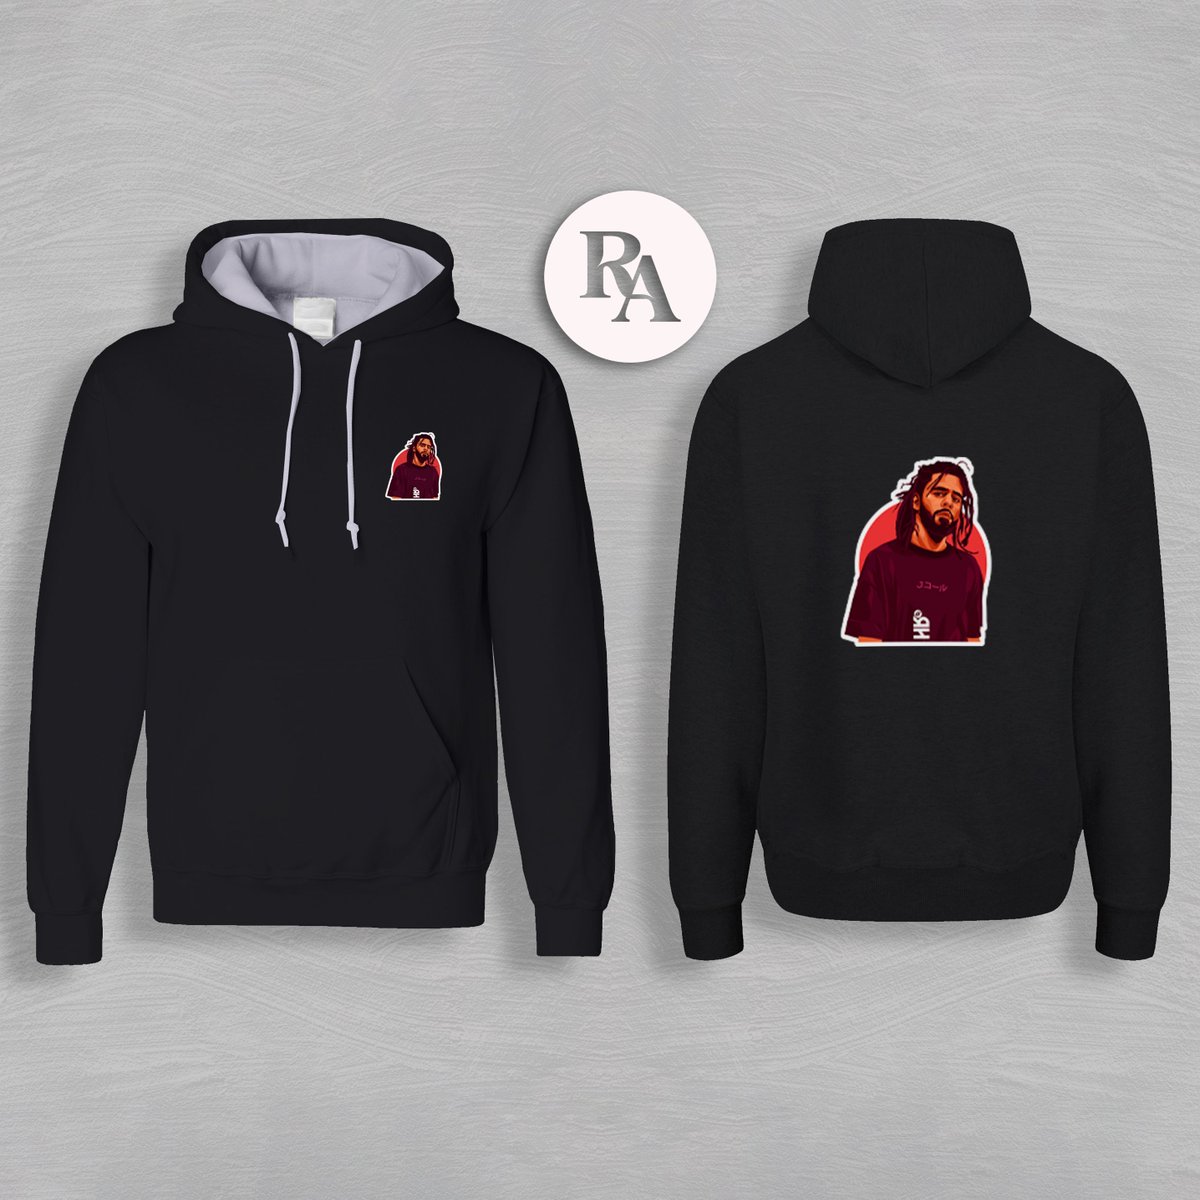 Elevate your style with R3b3l Collection's culturally inspired hoodies! Crafted from premium materials, these hoodies are a statement of your unique style and cultural appreciation. 

Perfect for bold statements, available in all sizes! #R3b3lStyle #CulturalFashion